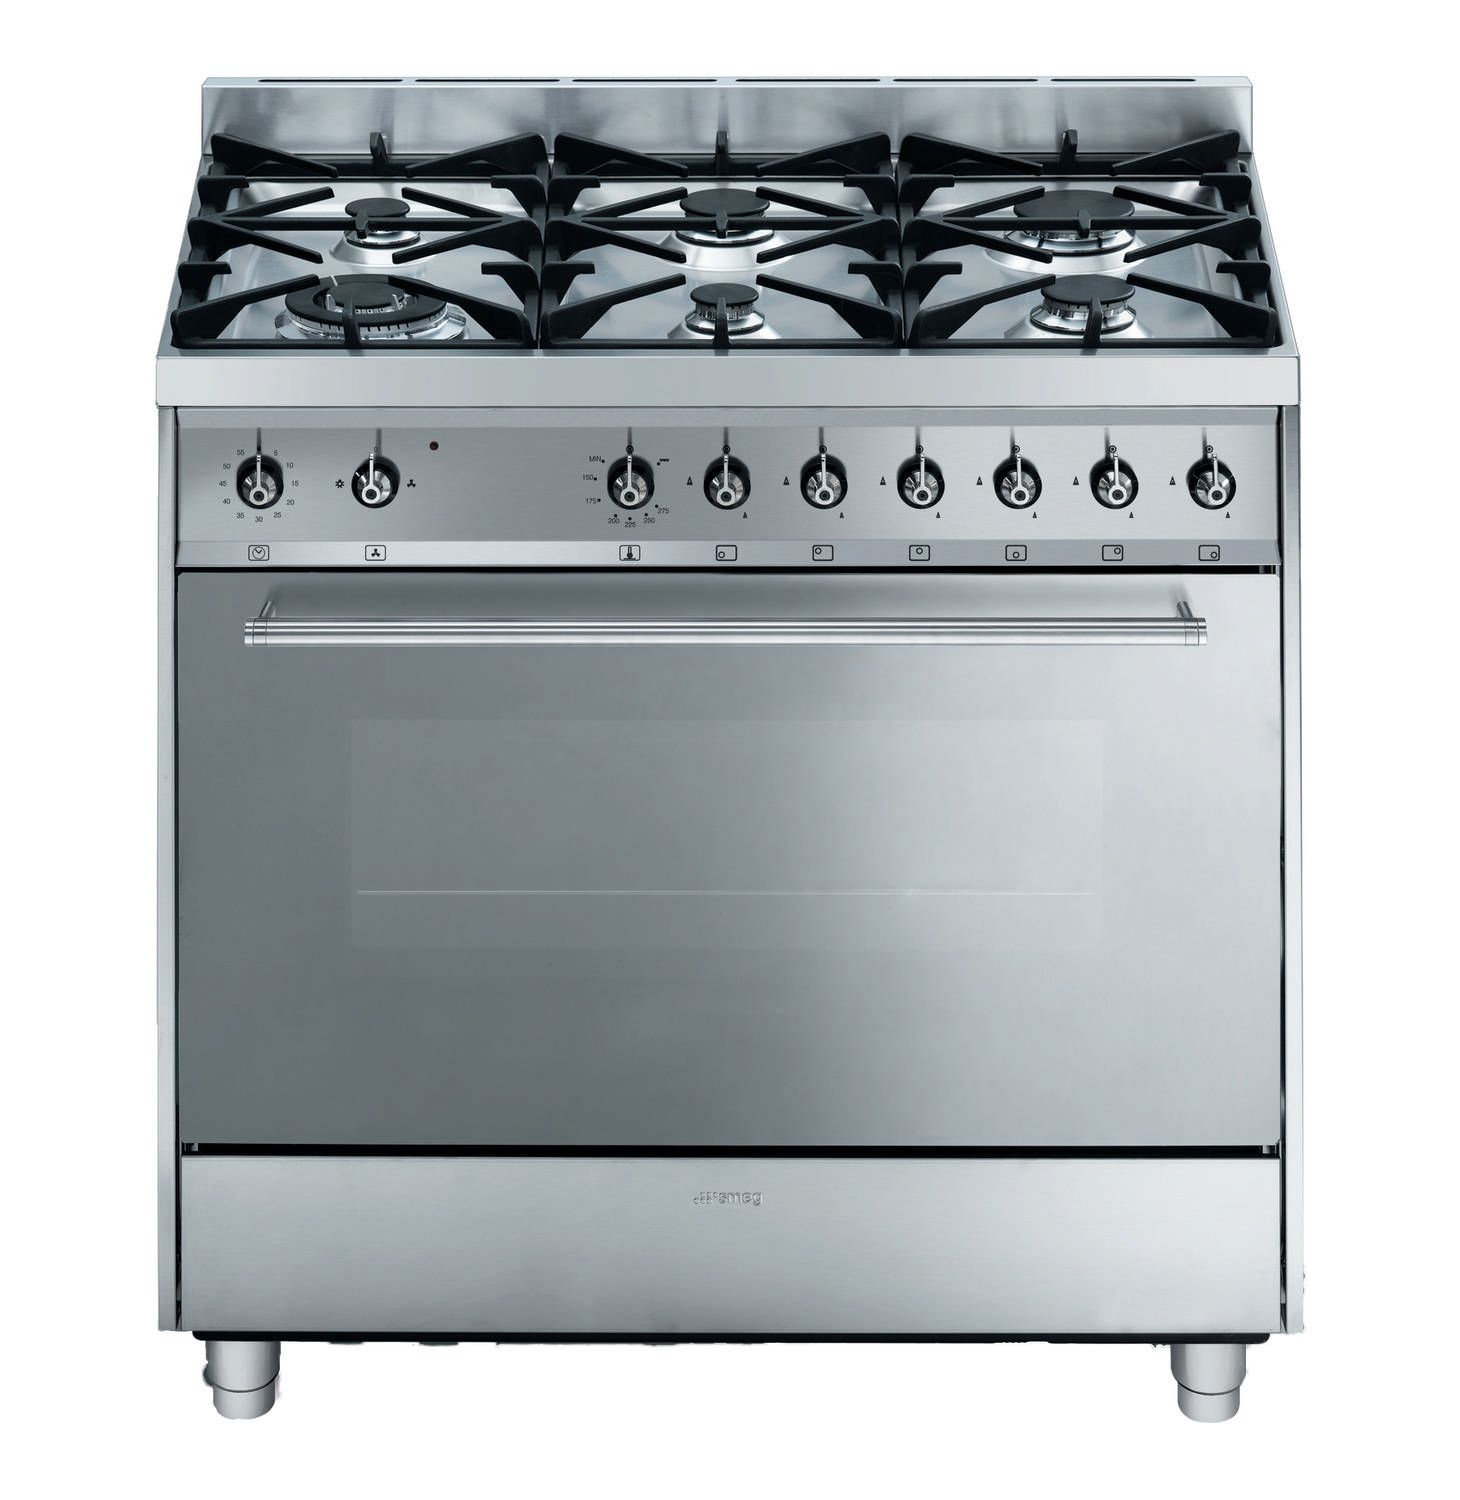 Gas Stove Buying Tips